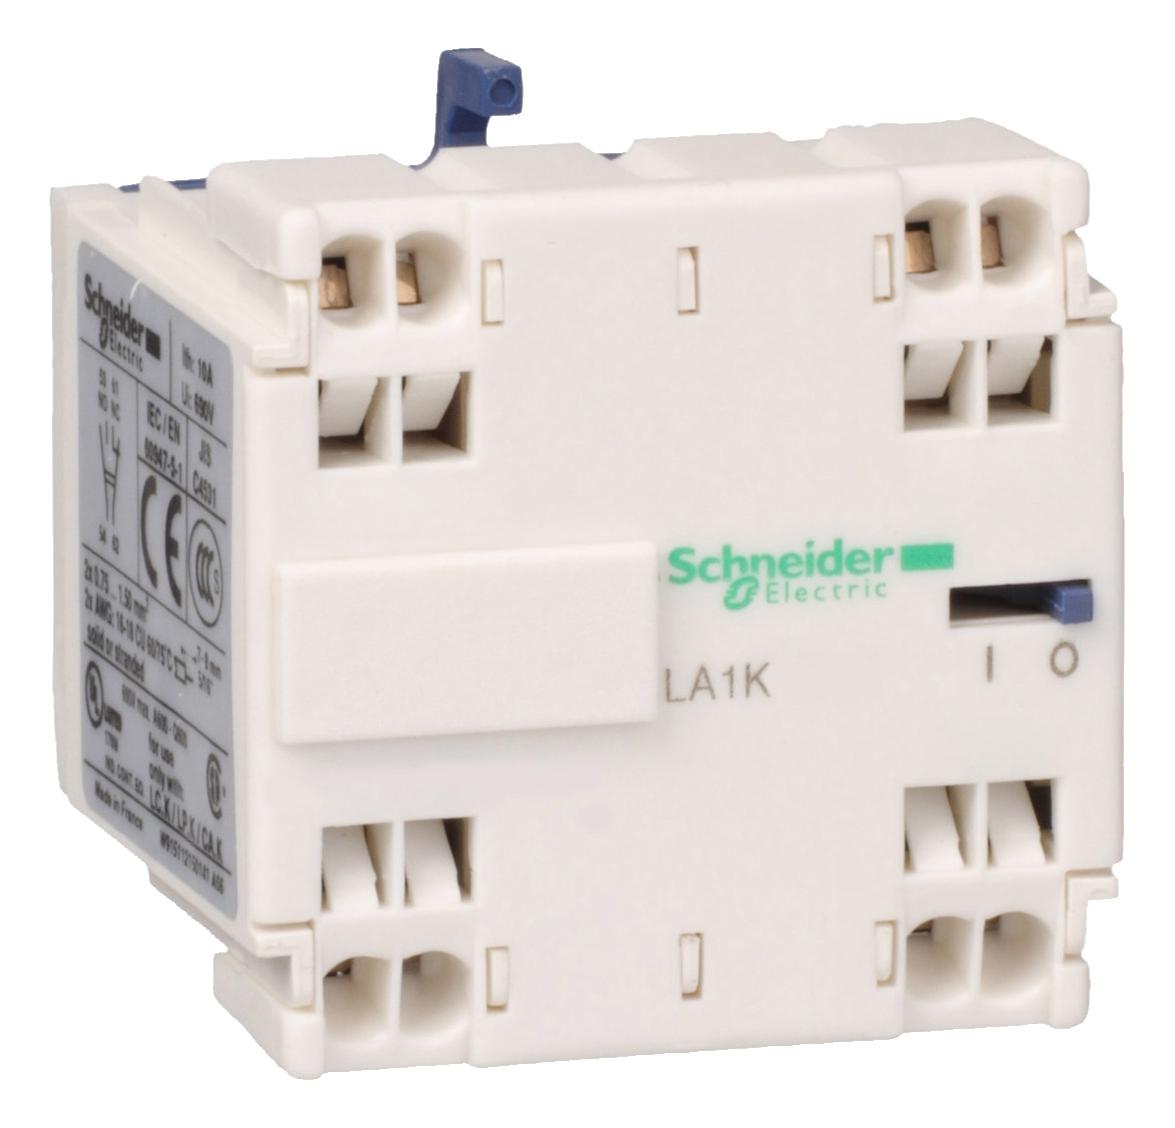 LA1KN023 AUXILIARY CONTACTS SCHNEIDER ELECTRIC